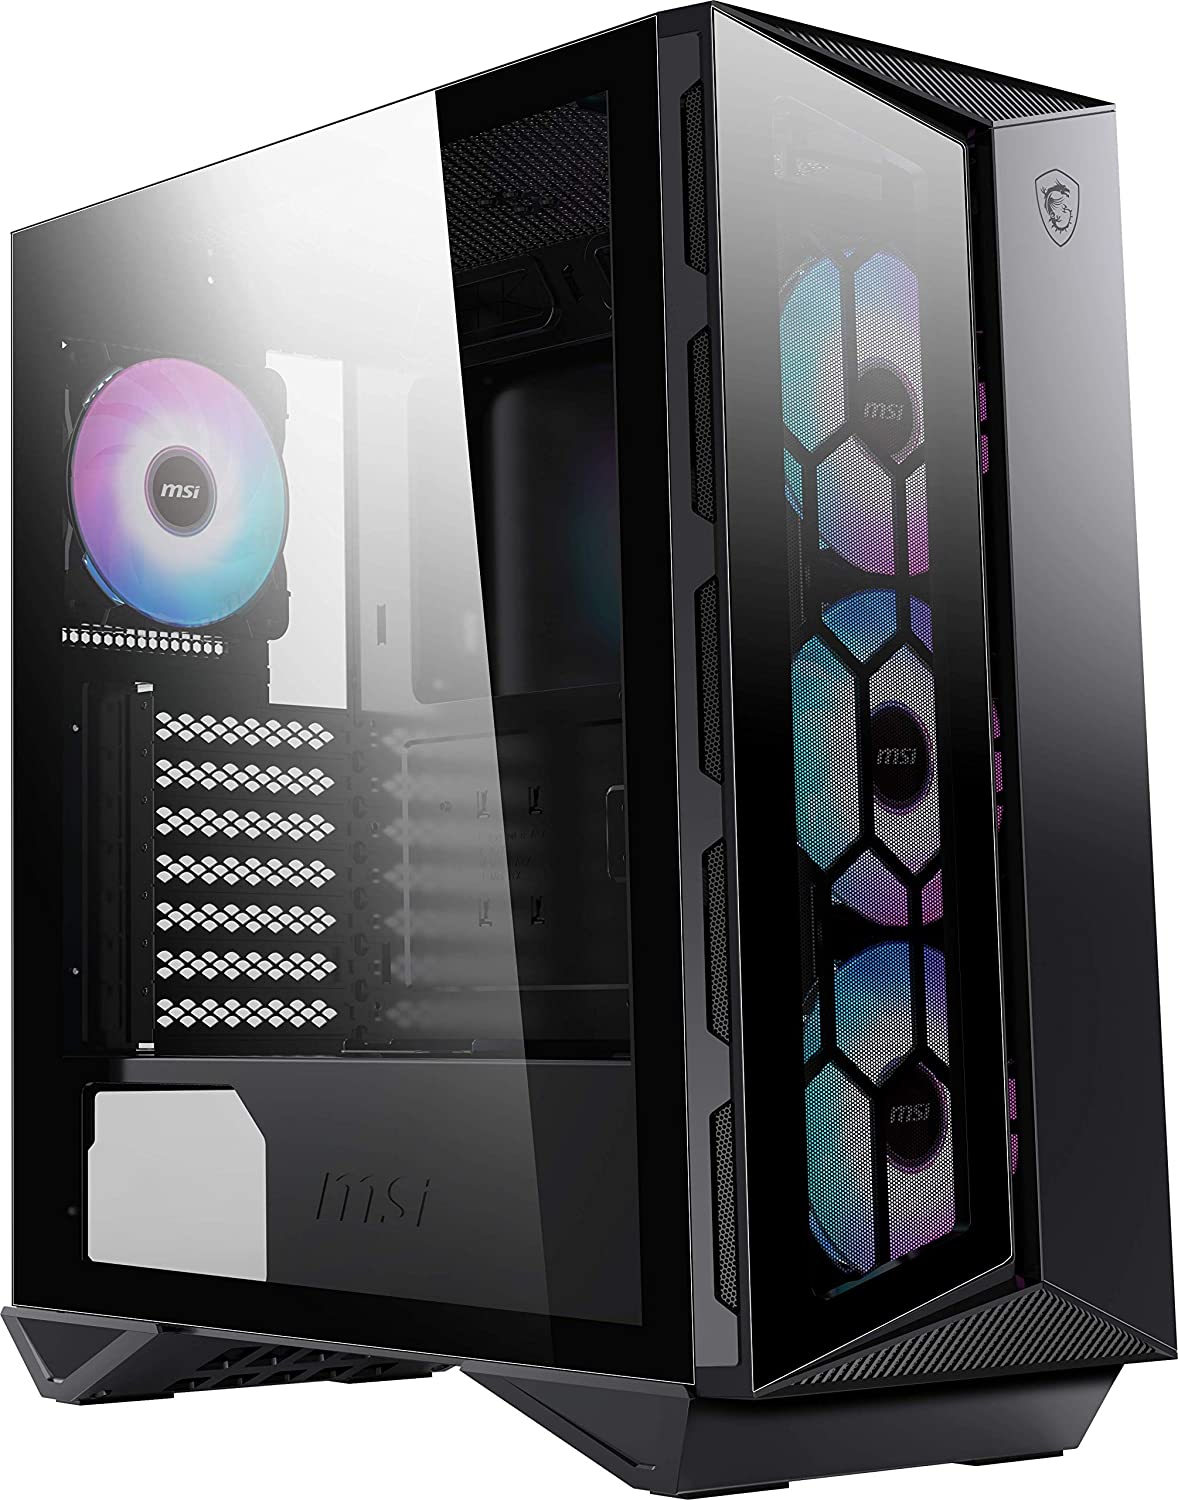 MSI Premium Mid-Tower PC Gaming Case – Tempered Glass Side Panel – RGB 120mm Fan – Liquid Cooling Support up to 360mm Radiator x 1 – Cable Management System – MPG GUNGNIR 110R